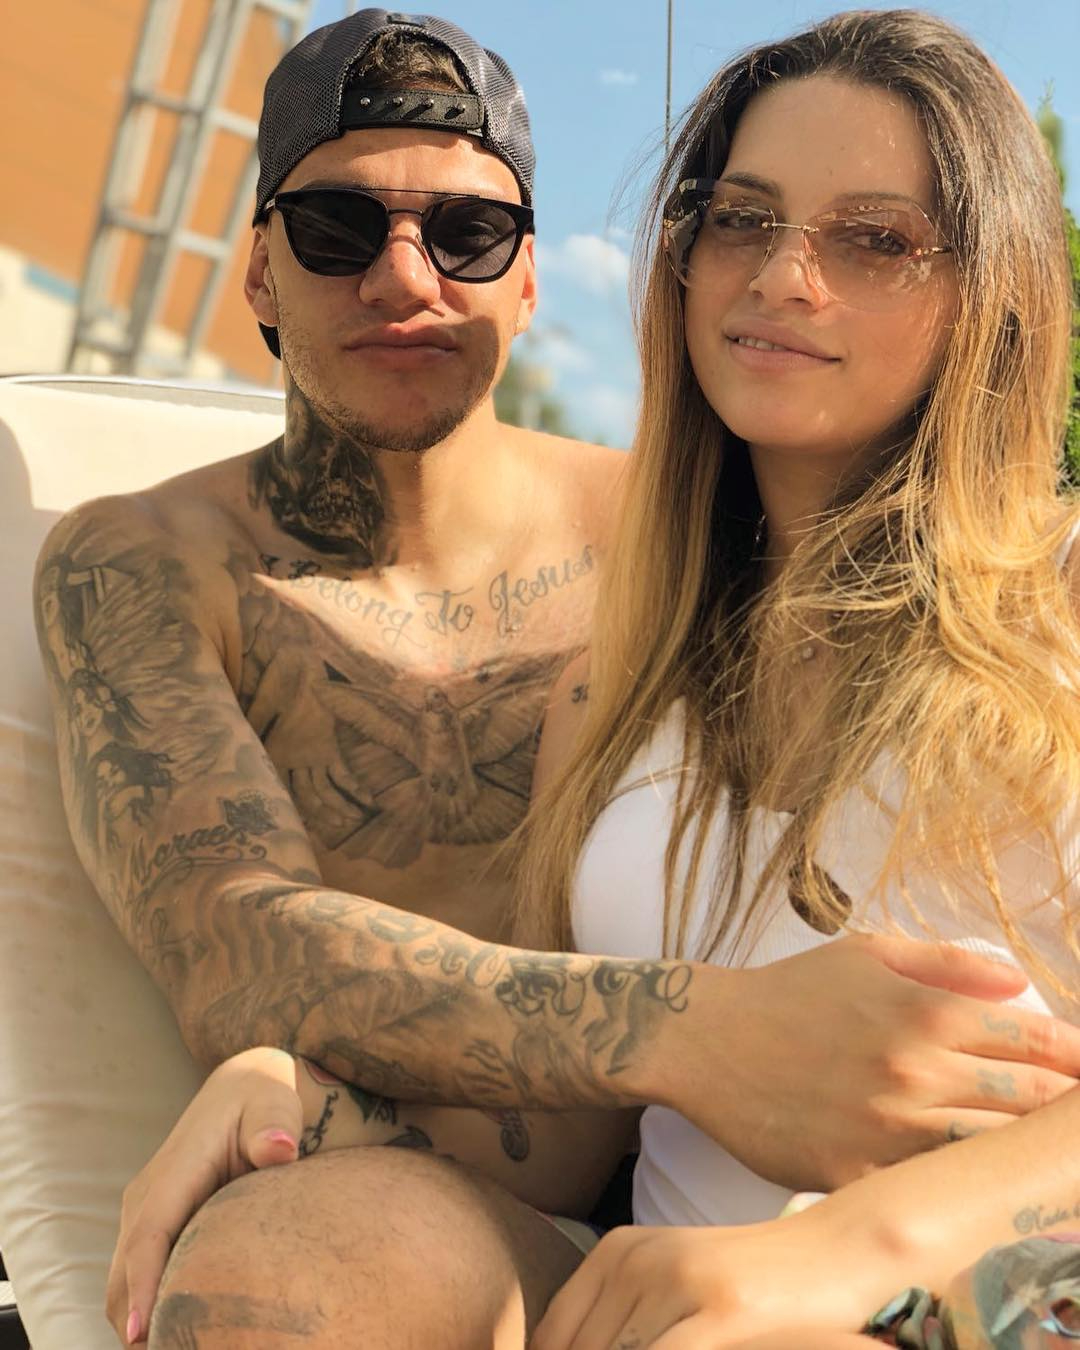 Man City keeper Ederson desperate for Champions League glory to avoid hairdryer treatment from wife